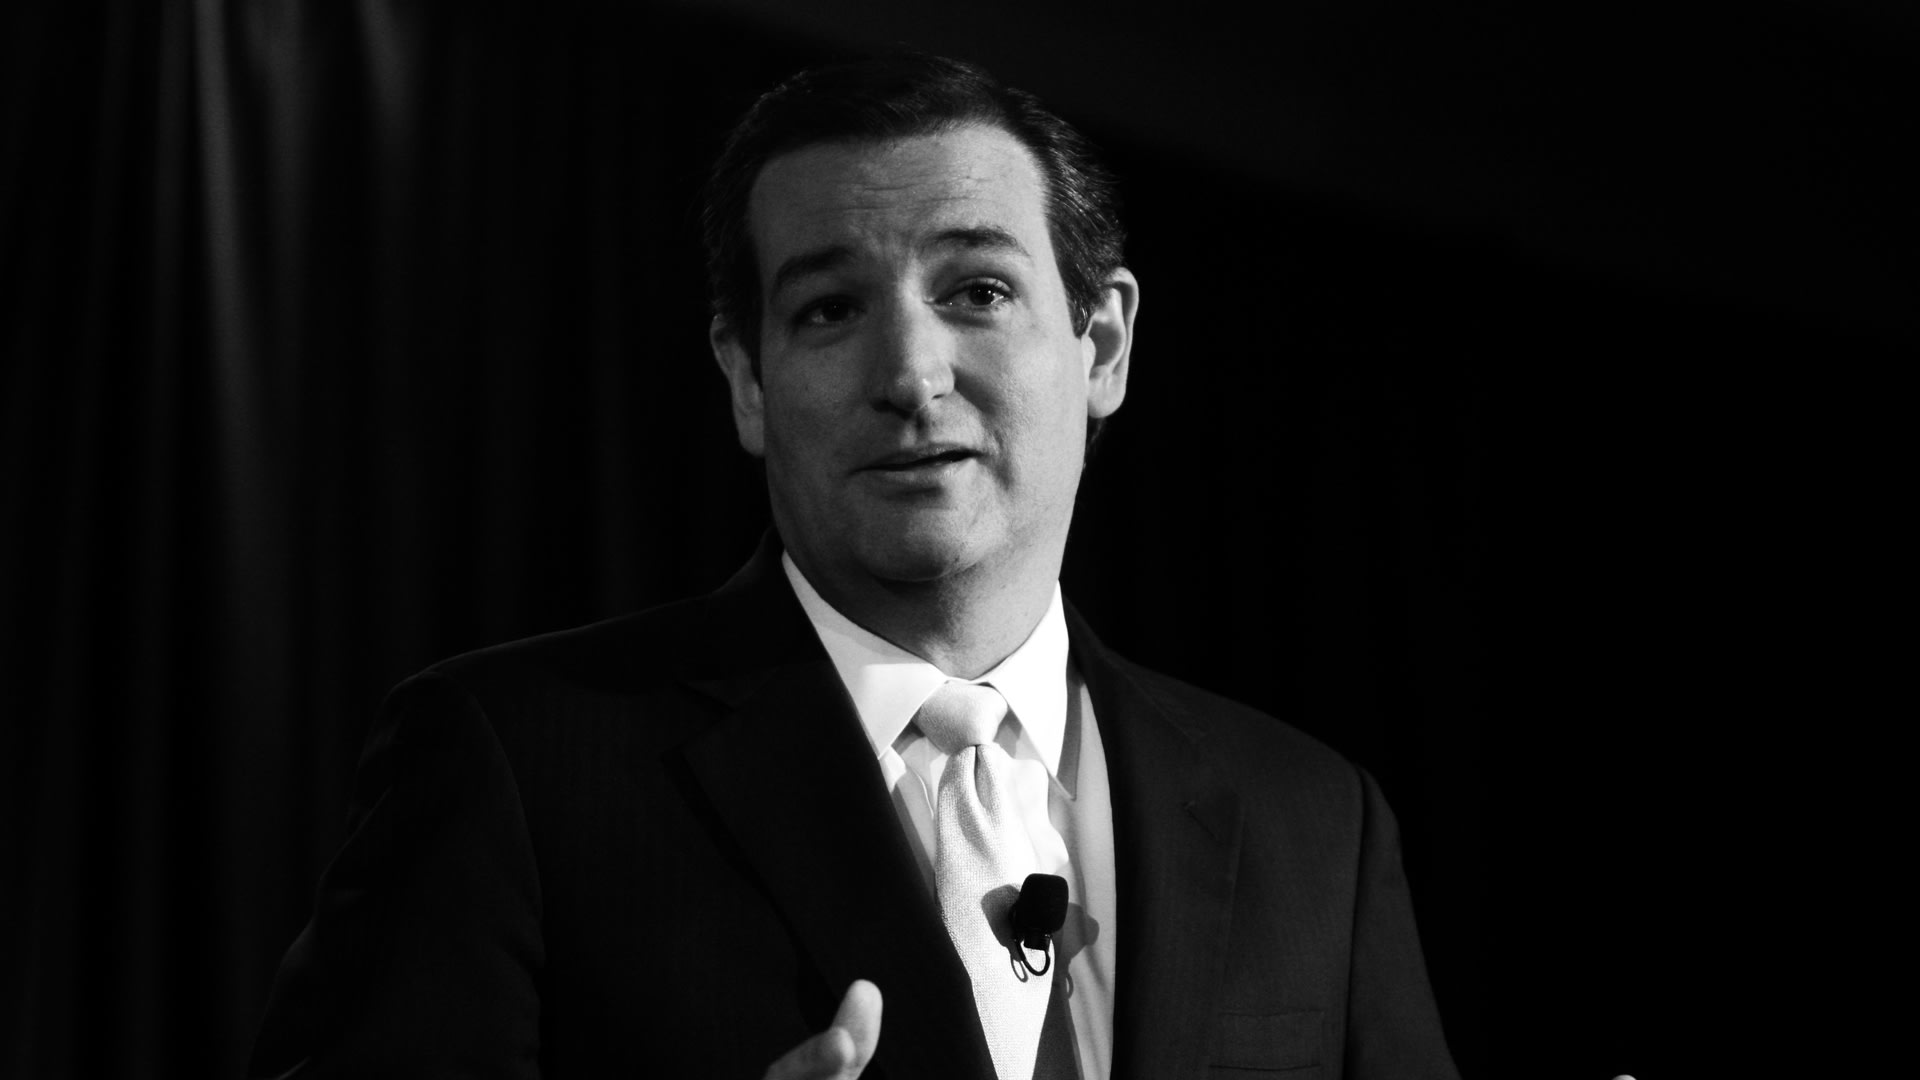 Ted Cruz made it clear he supports repealing tech platforms’ safe harbor